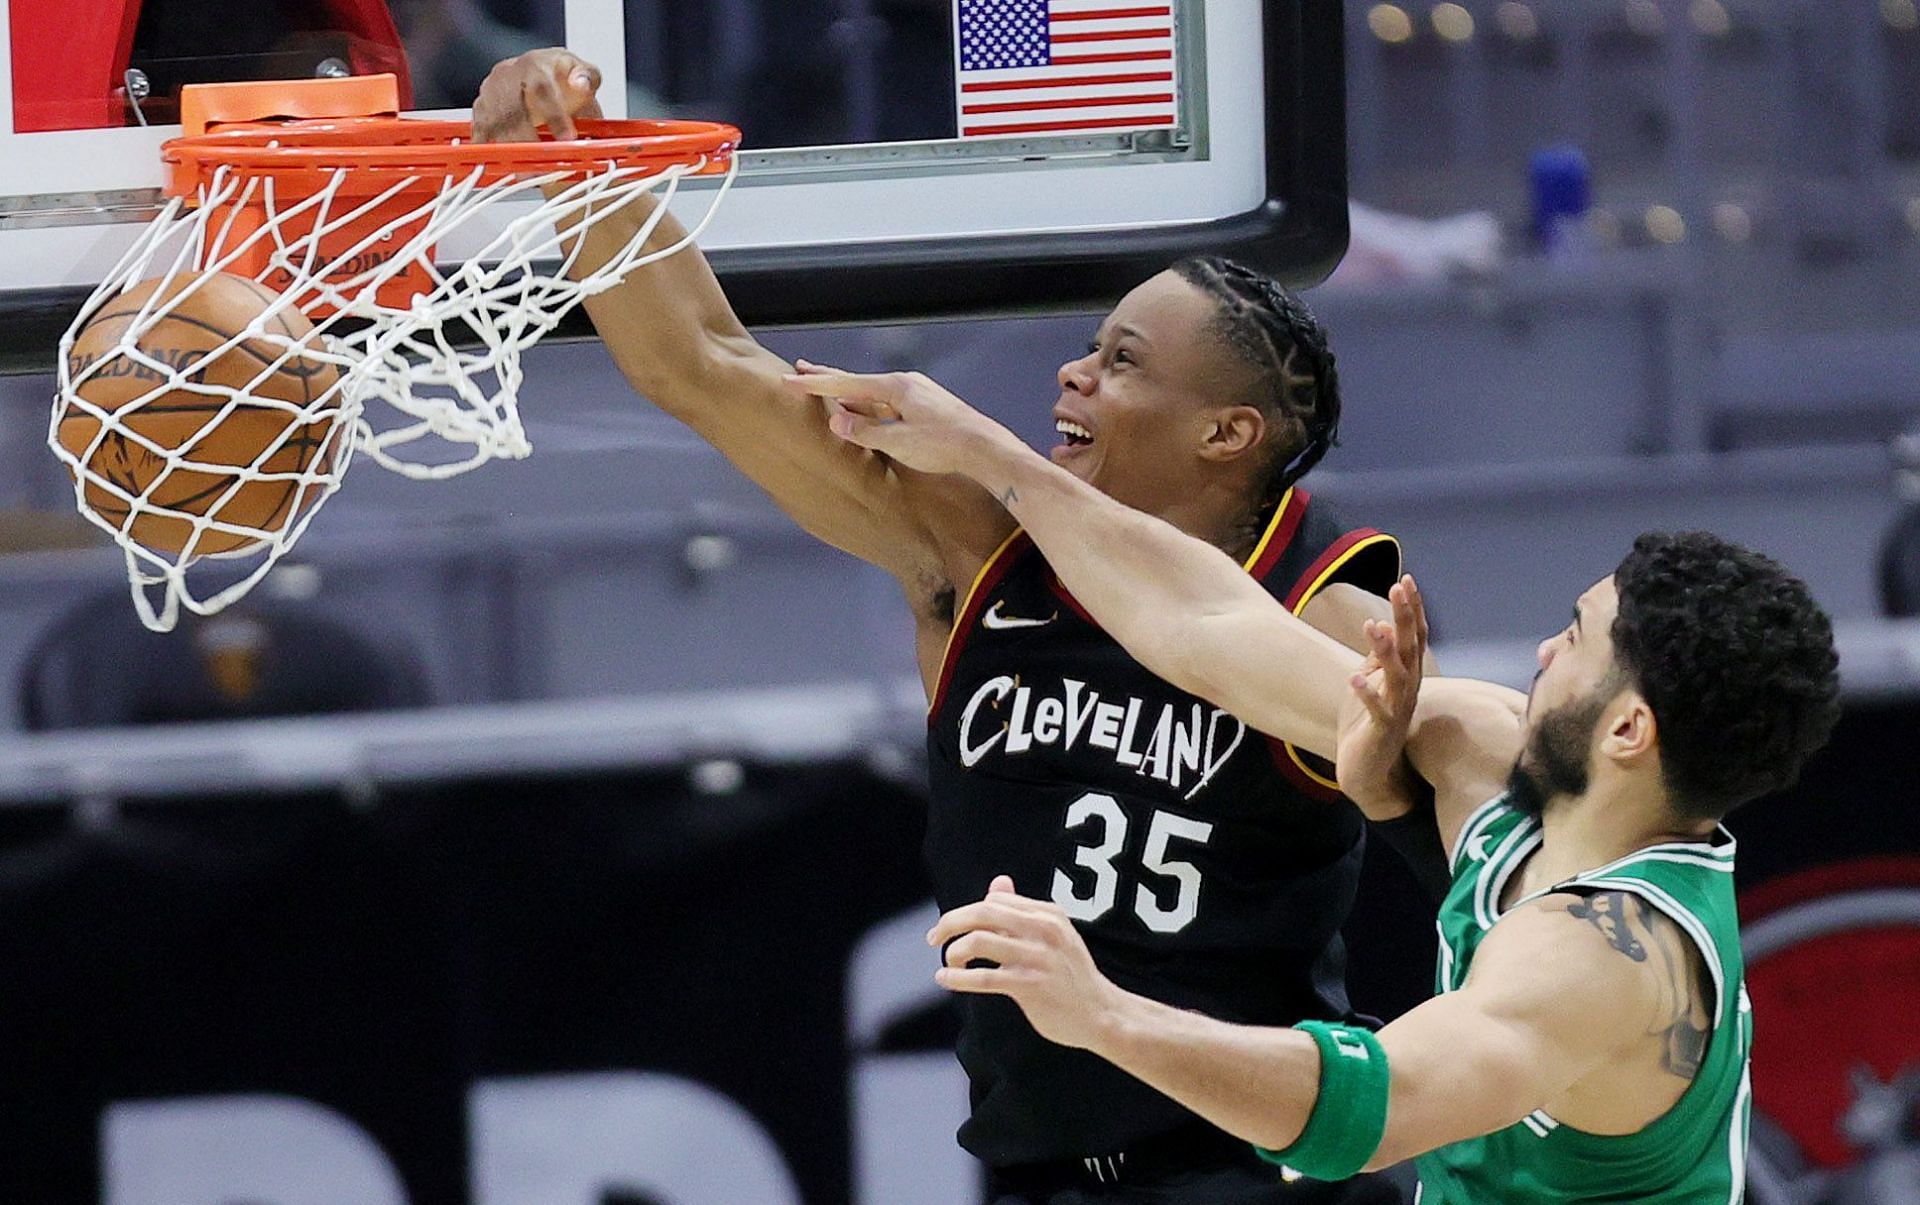 The Boston Celtics will take on the Cleveland Cavaliers at Rocket Mortgage Fieldhouse on Saturday. [Photo: Cleveland.com]